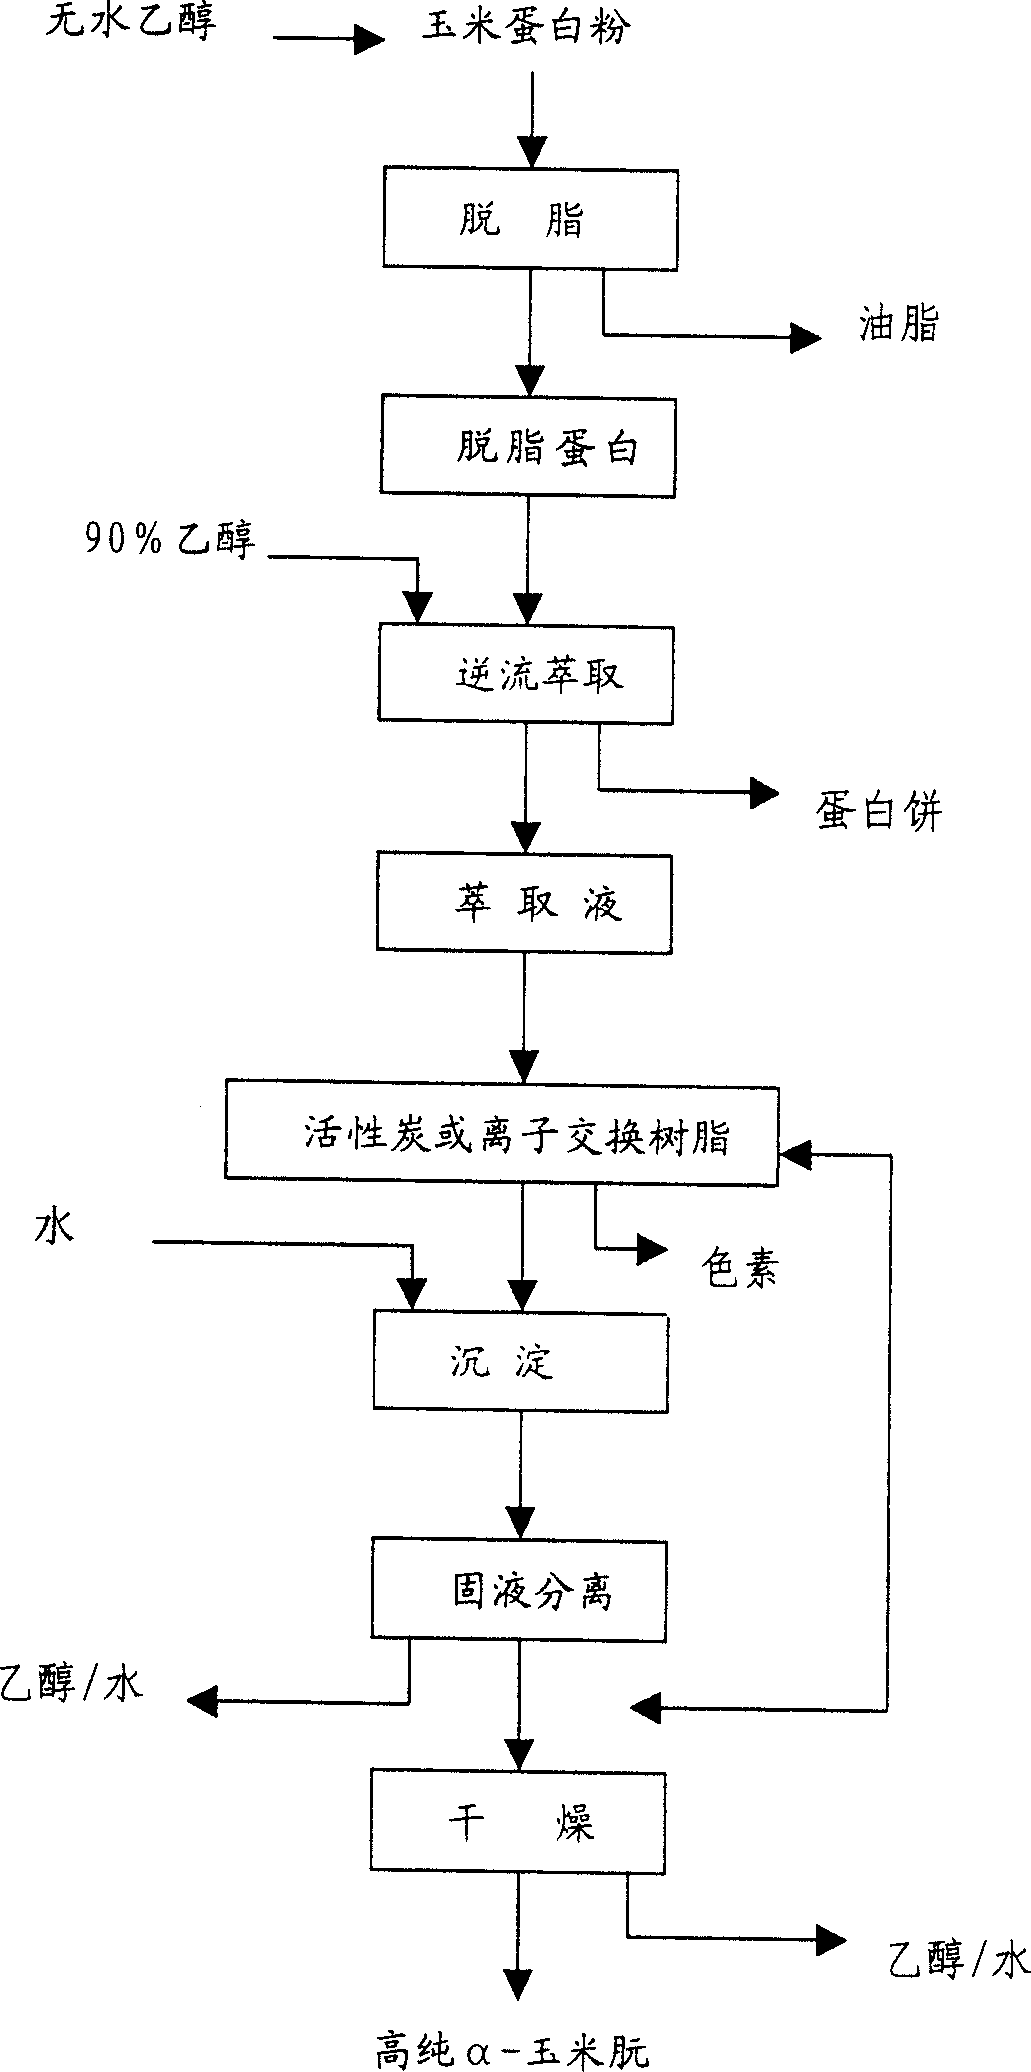 Method for preparing high purity alpha corn protein